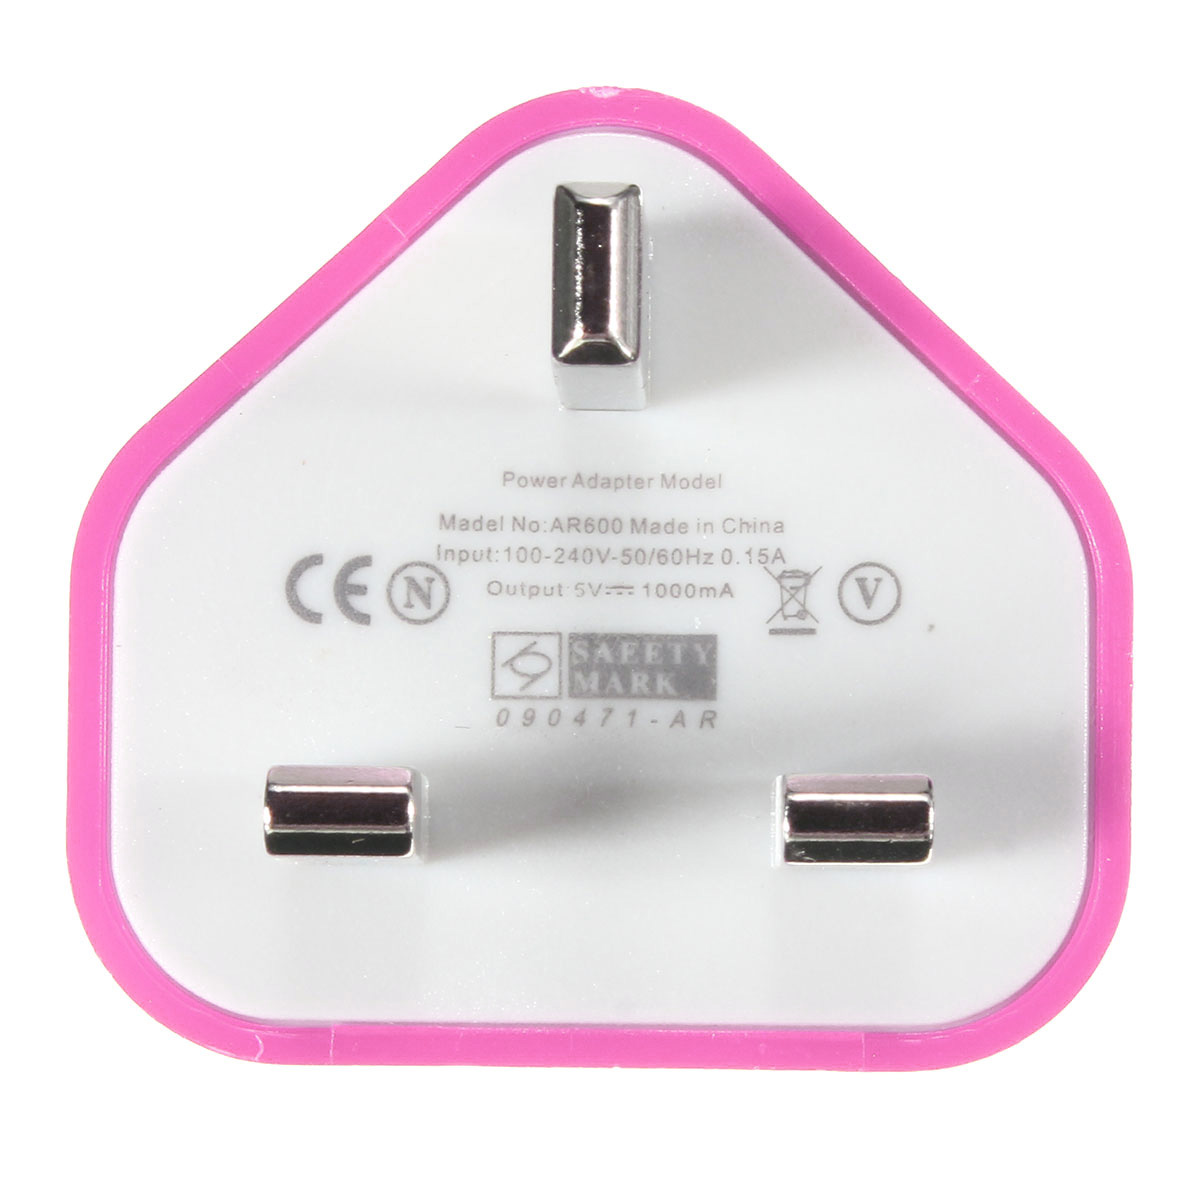 UK-USB-Plug-Charger-Mains-Wall-Home-Adapter-For-Samsung-Android-Phone-Tablets-1191576-4